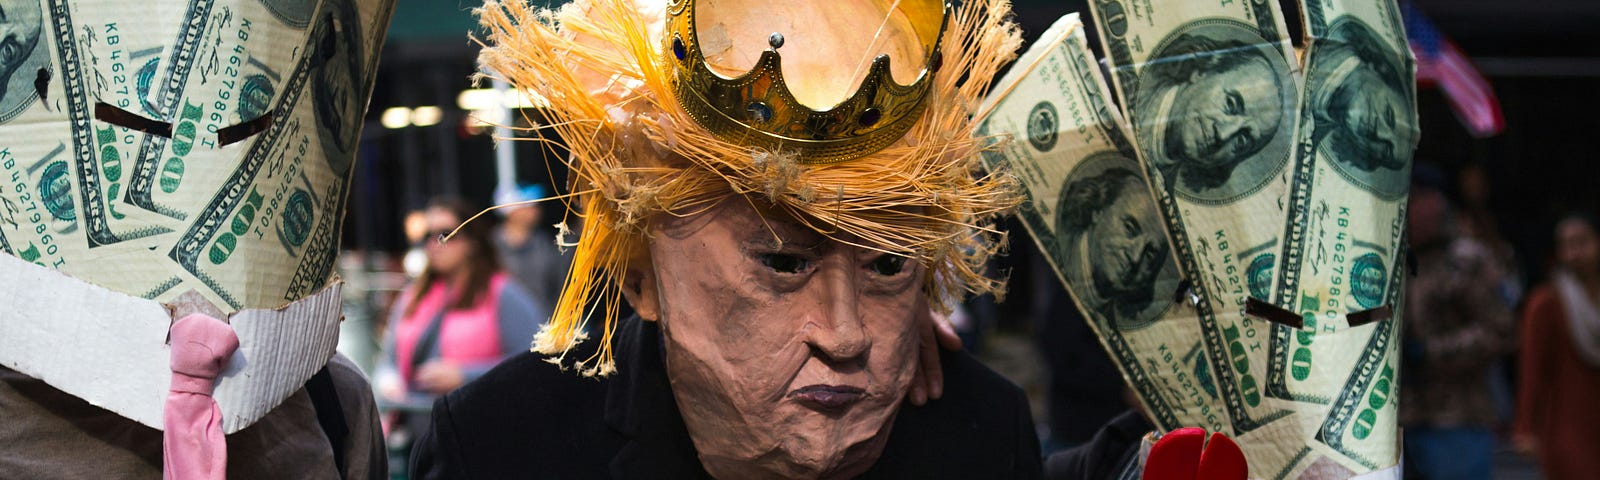 A caricature of Donald Trump wearing a crown and holding a bag of Cheatos